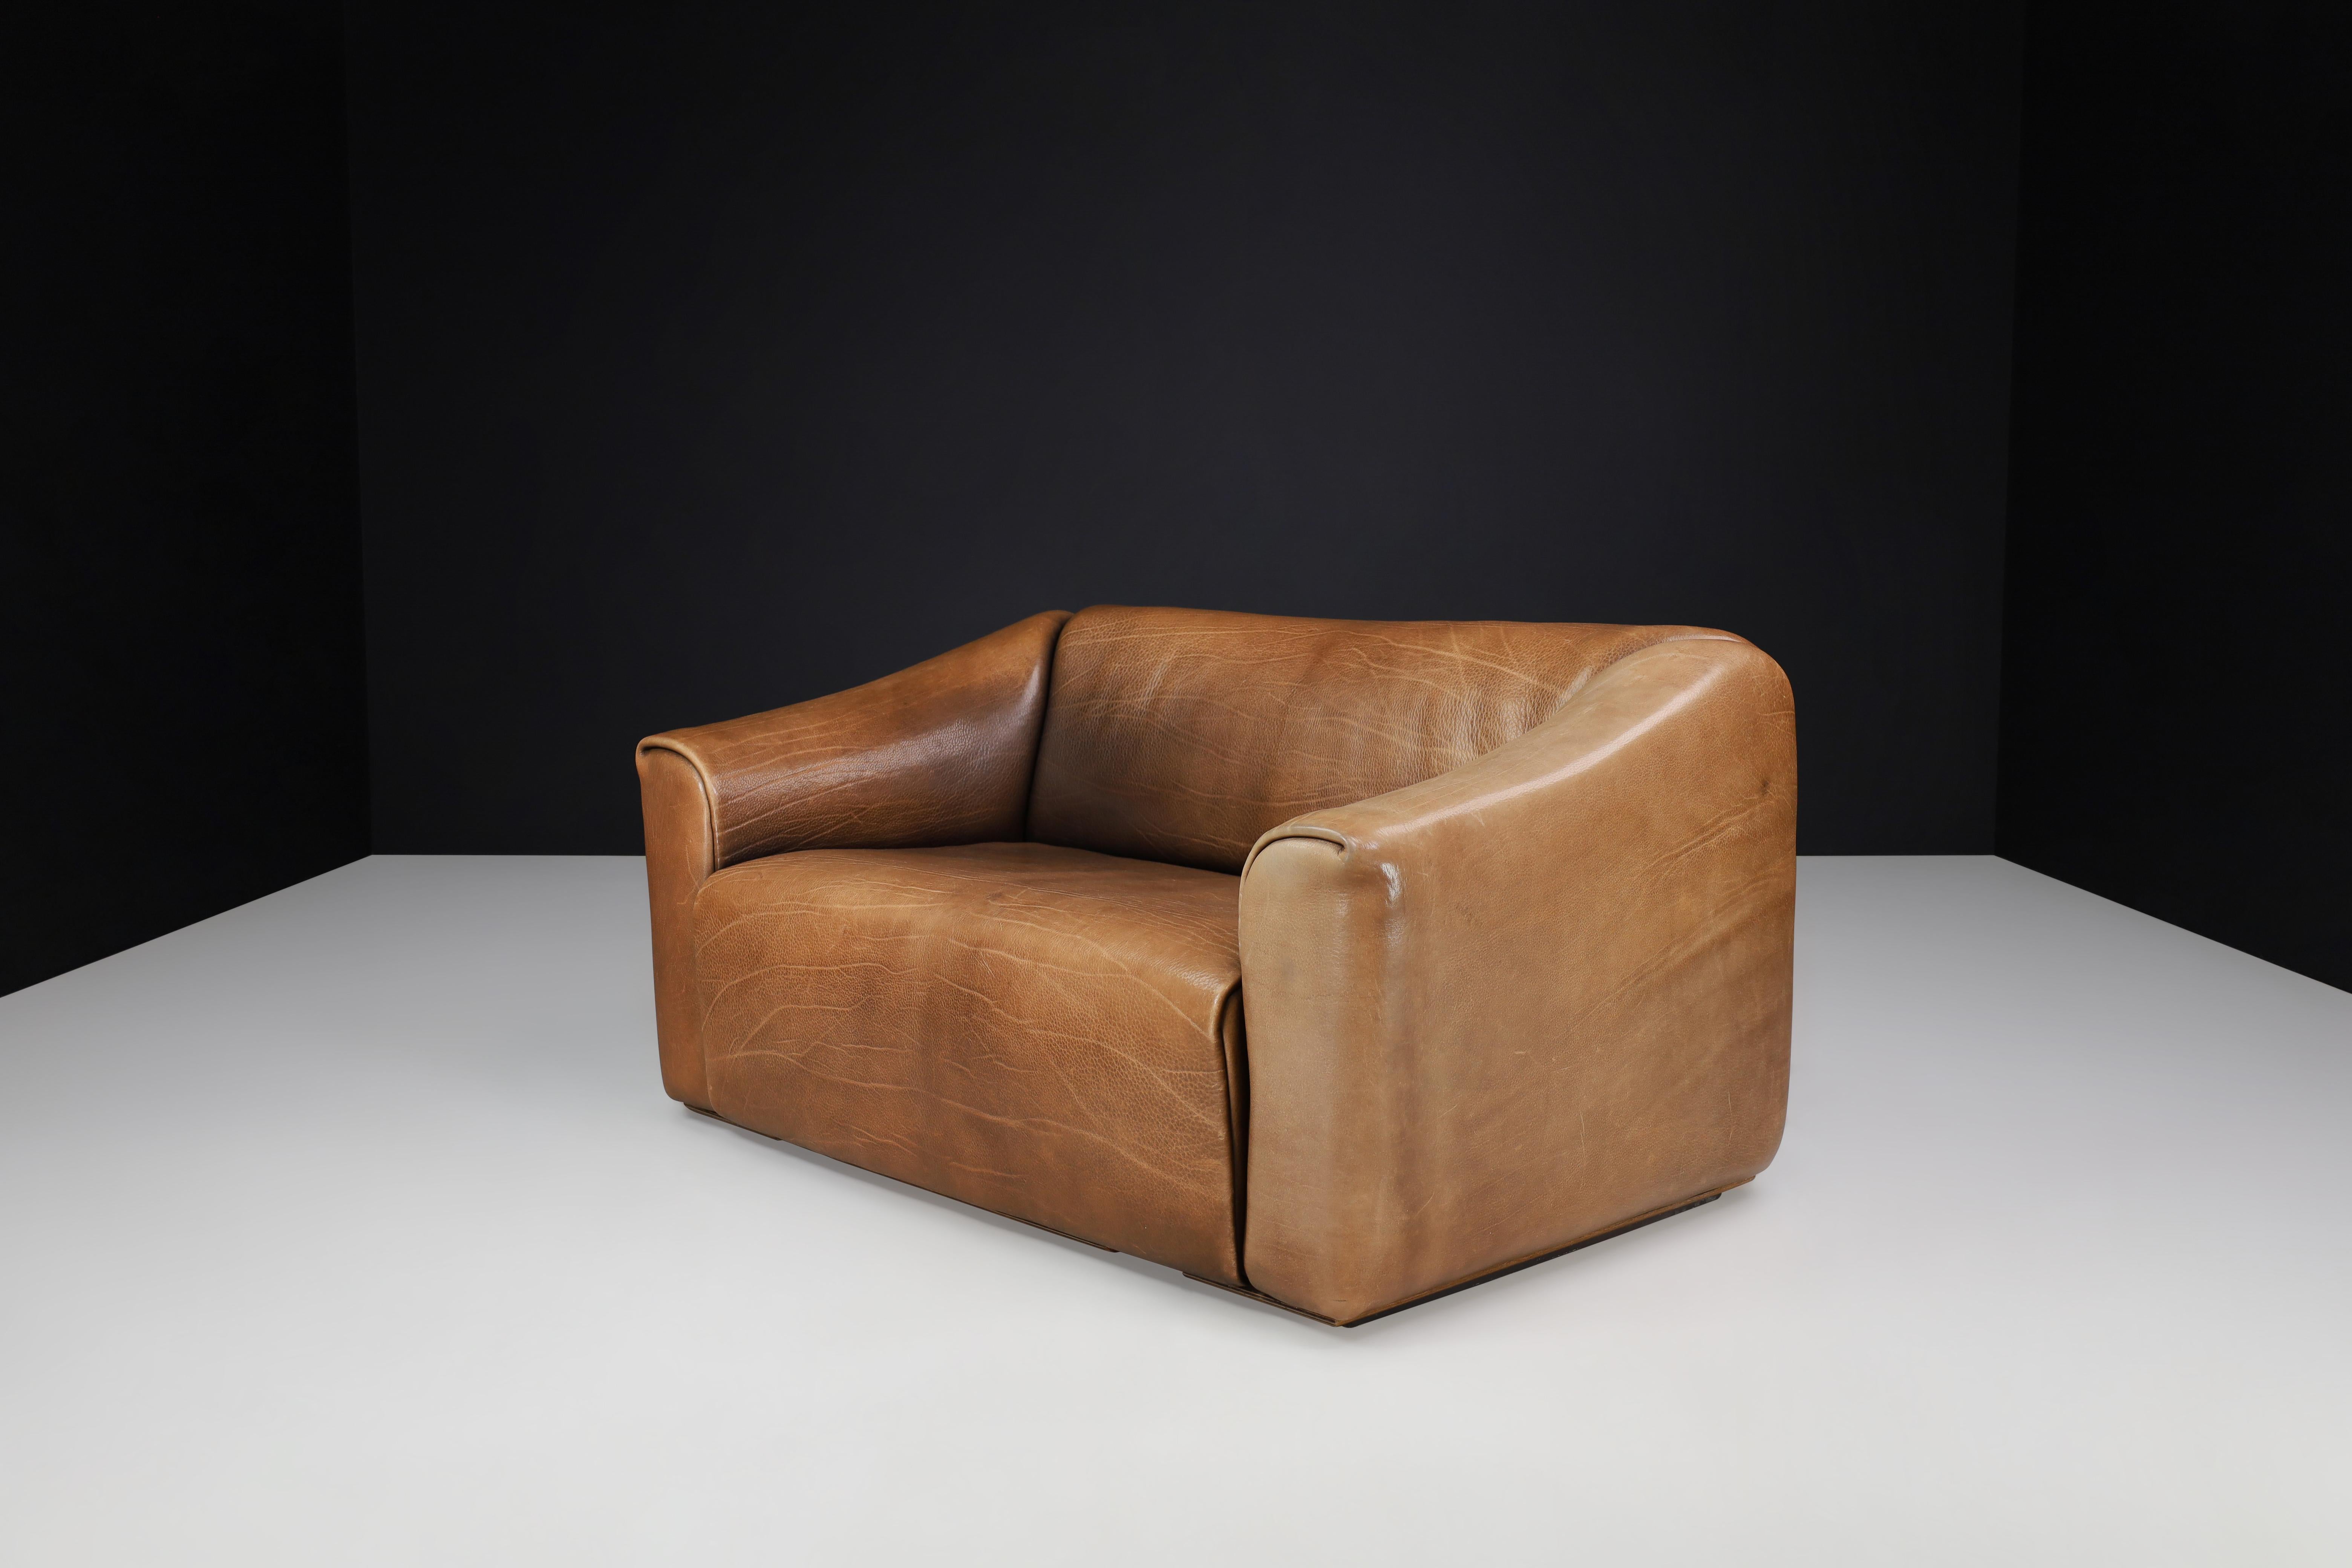 Mid-Century Modern De Sede Ds-47 Neck Leather Two-Seat Sofa from Switzerland 1970s For Sale